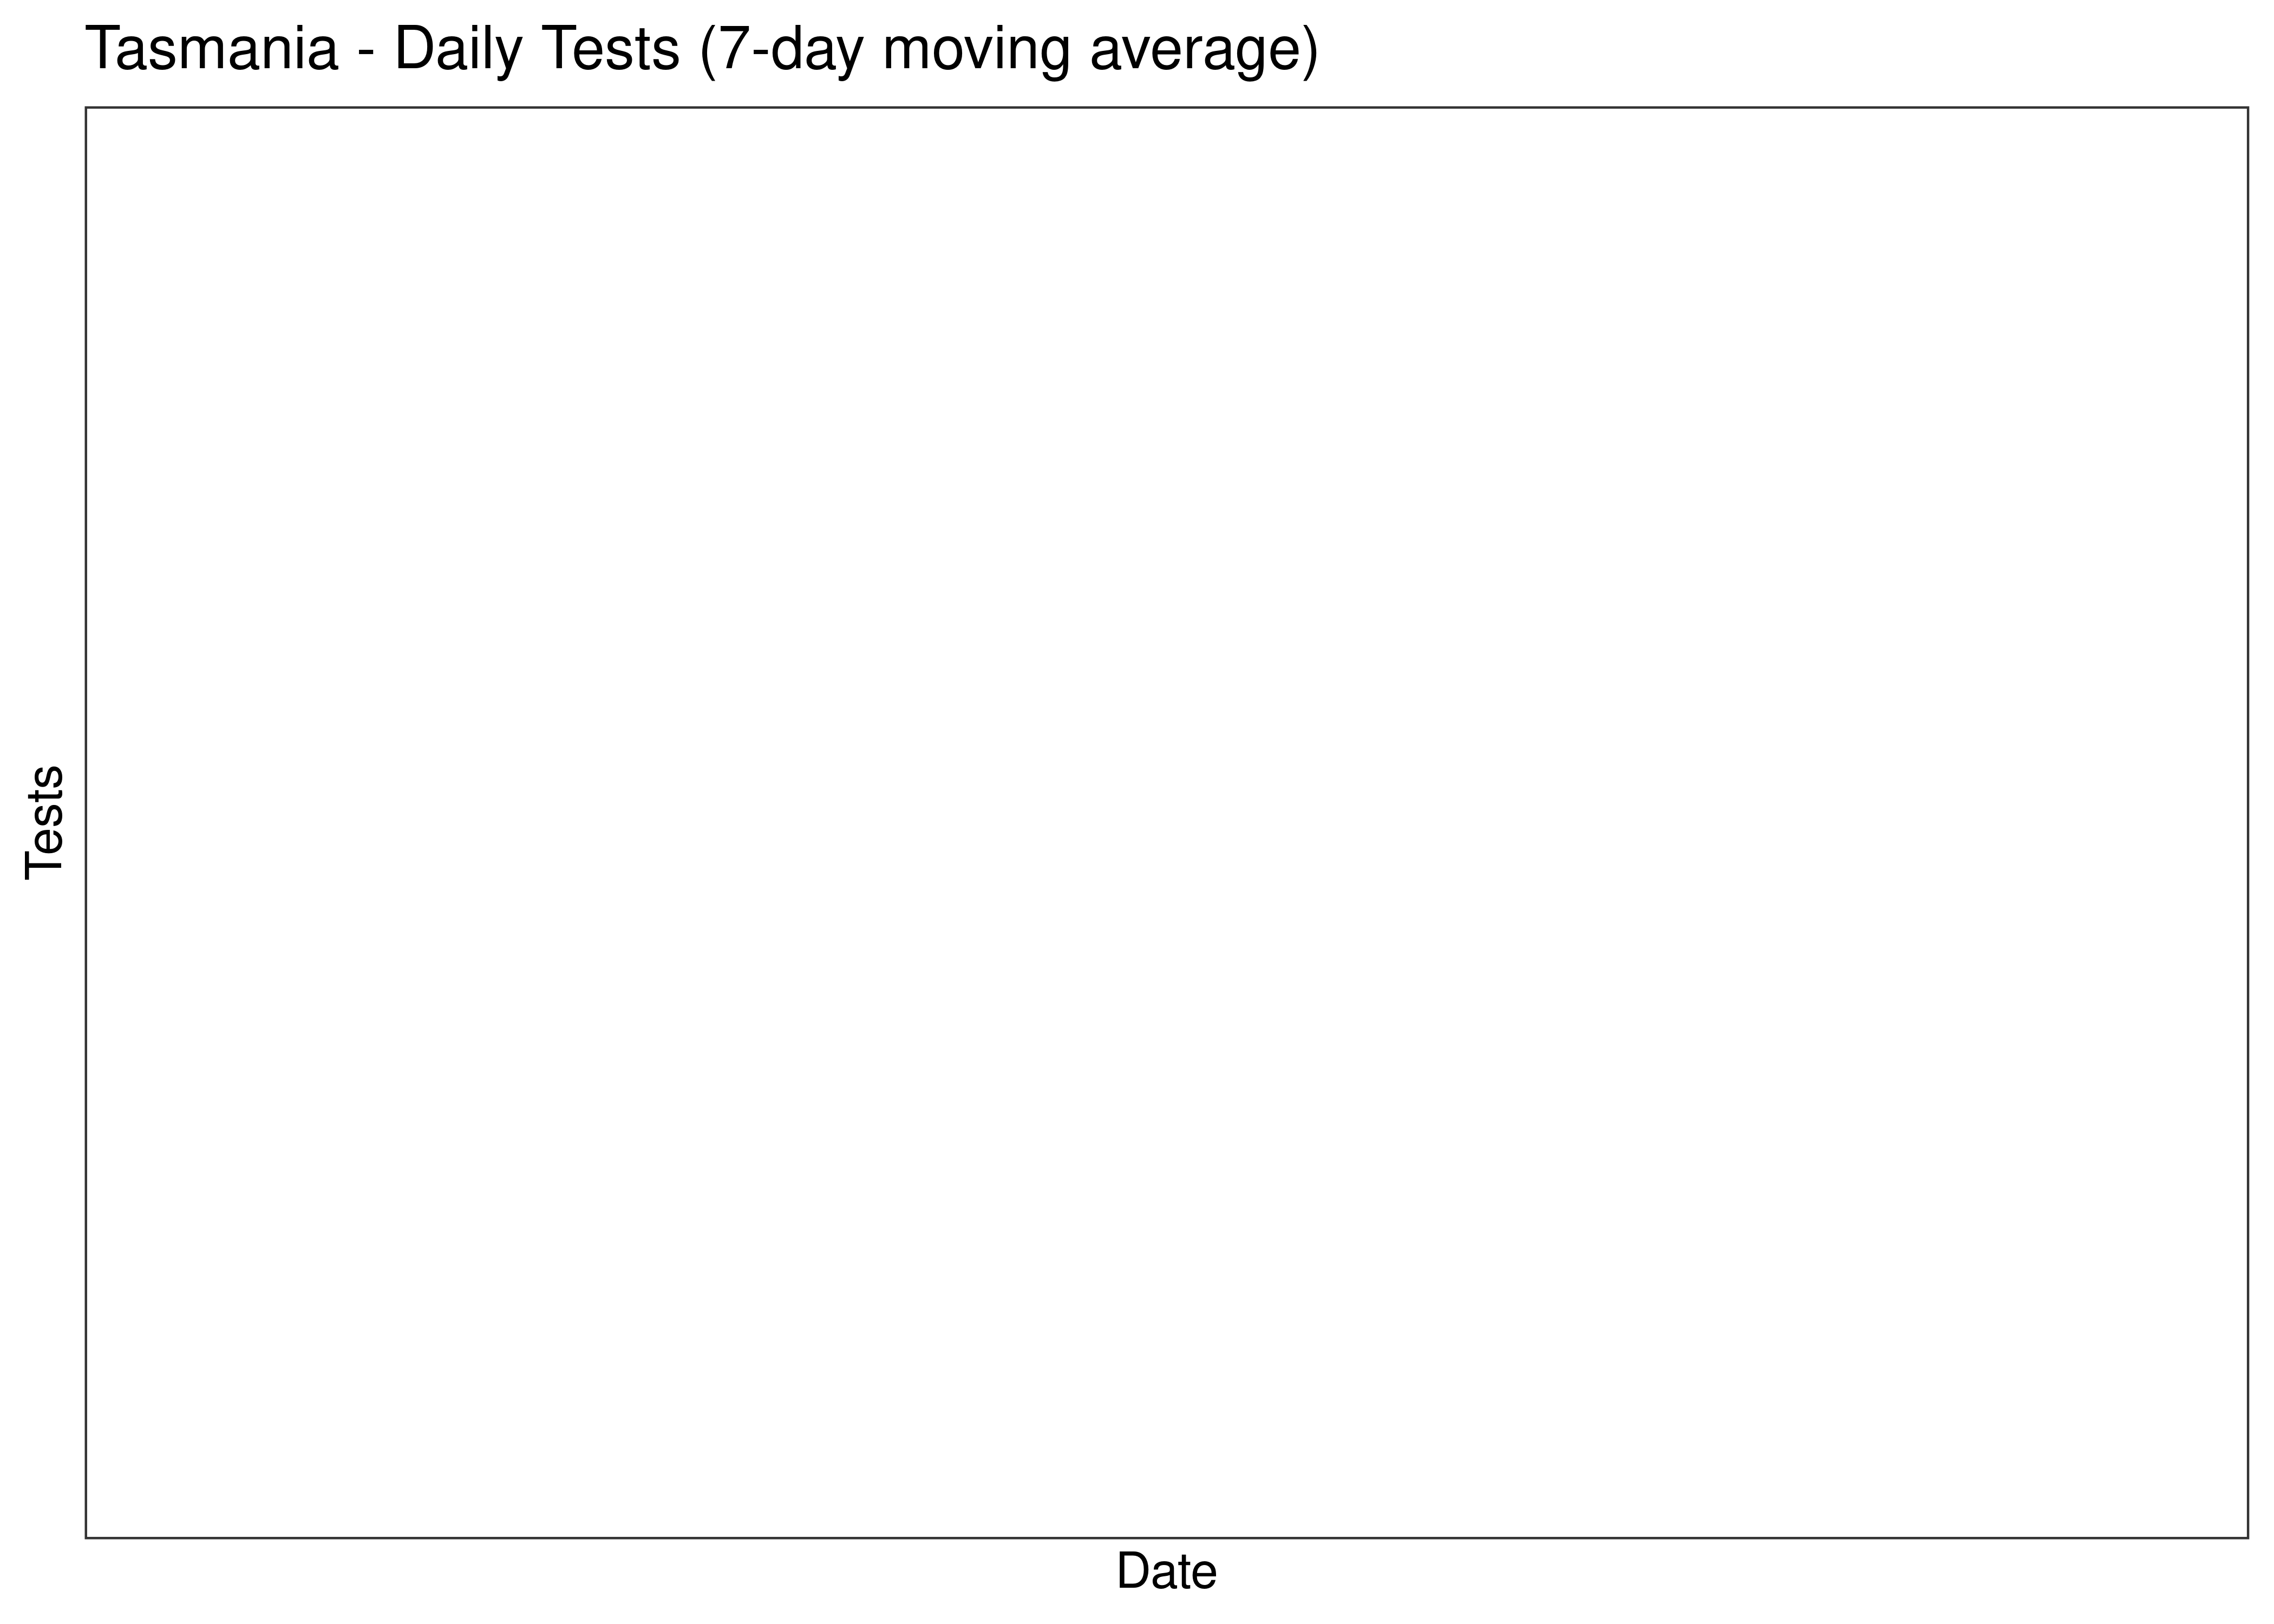 Tasmania - Daily Tests for Last 30 Days (7-day moving average)